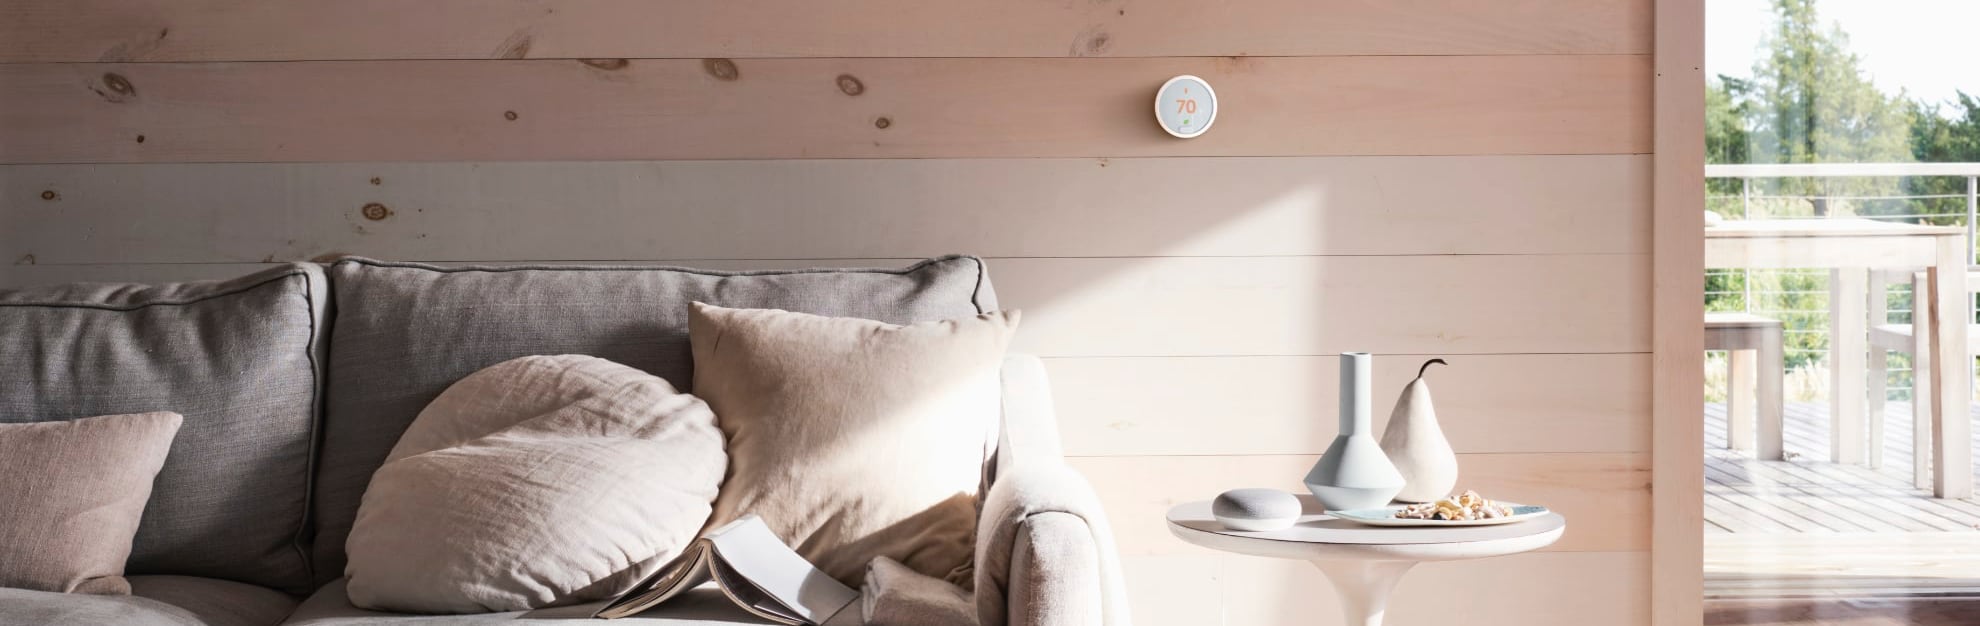 Vivint Home Automation in San Francisco